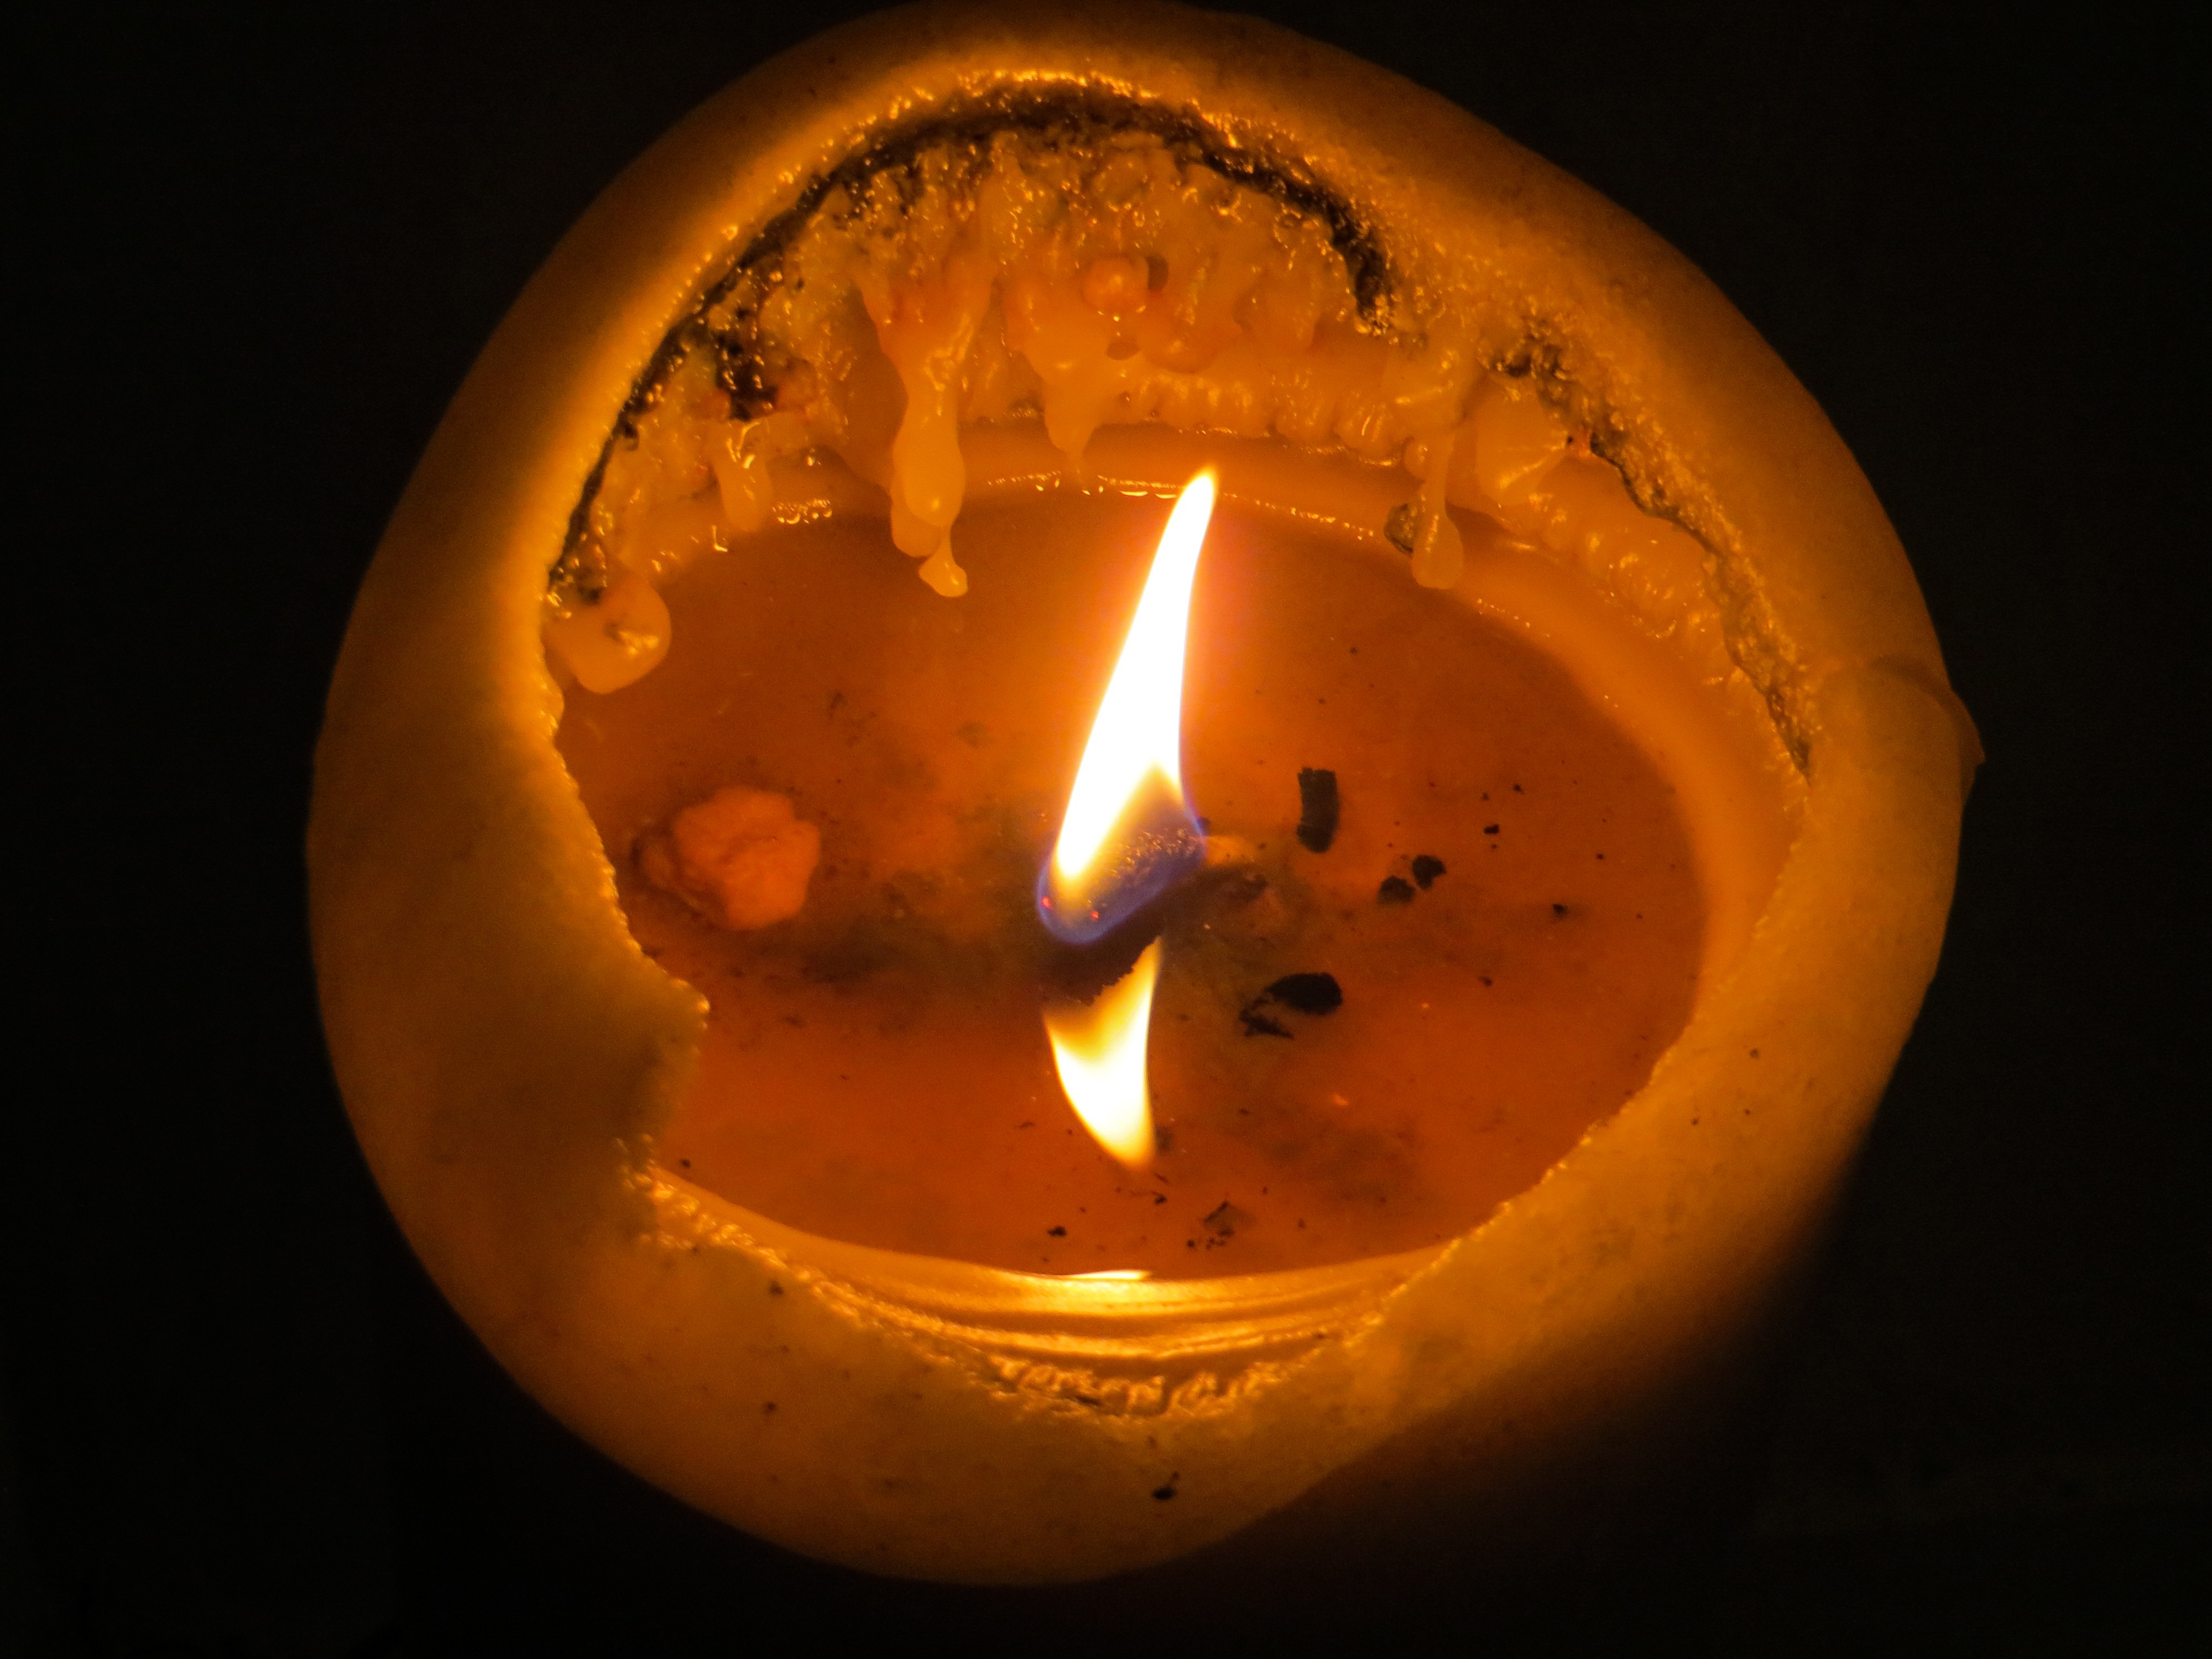 Candle on Fire, Burn, Burning, Candle, Fire, HQ Photo